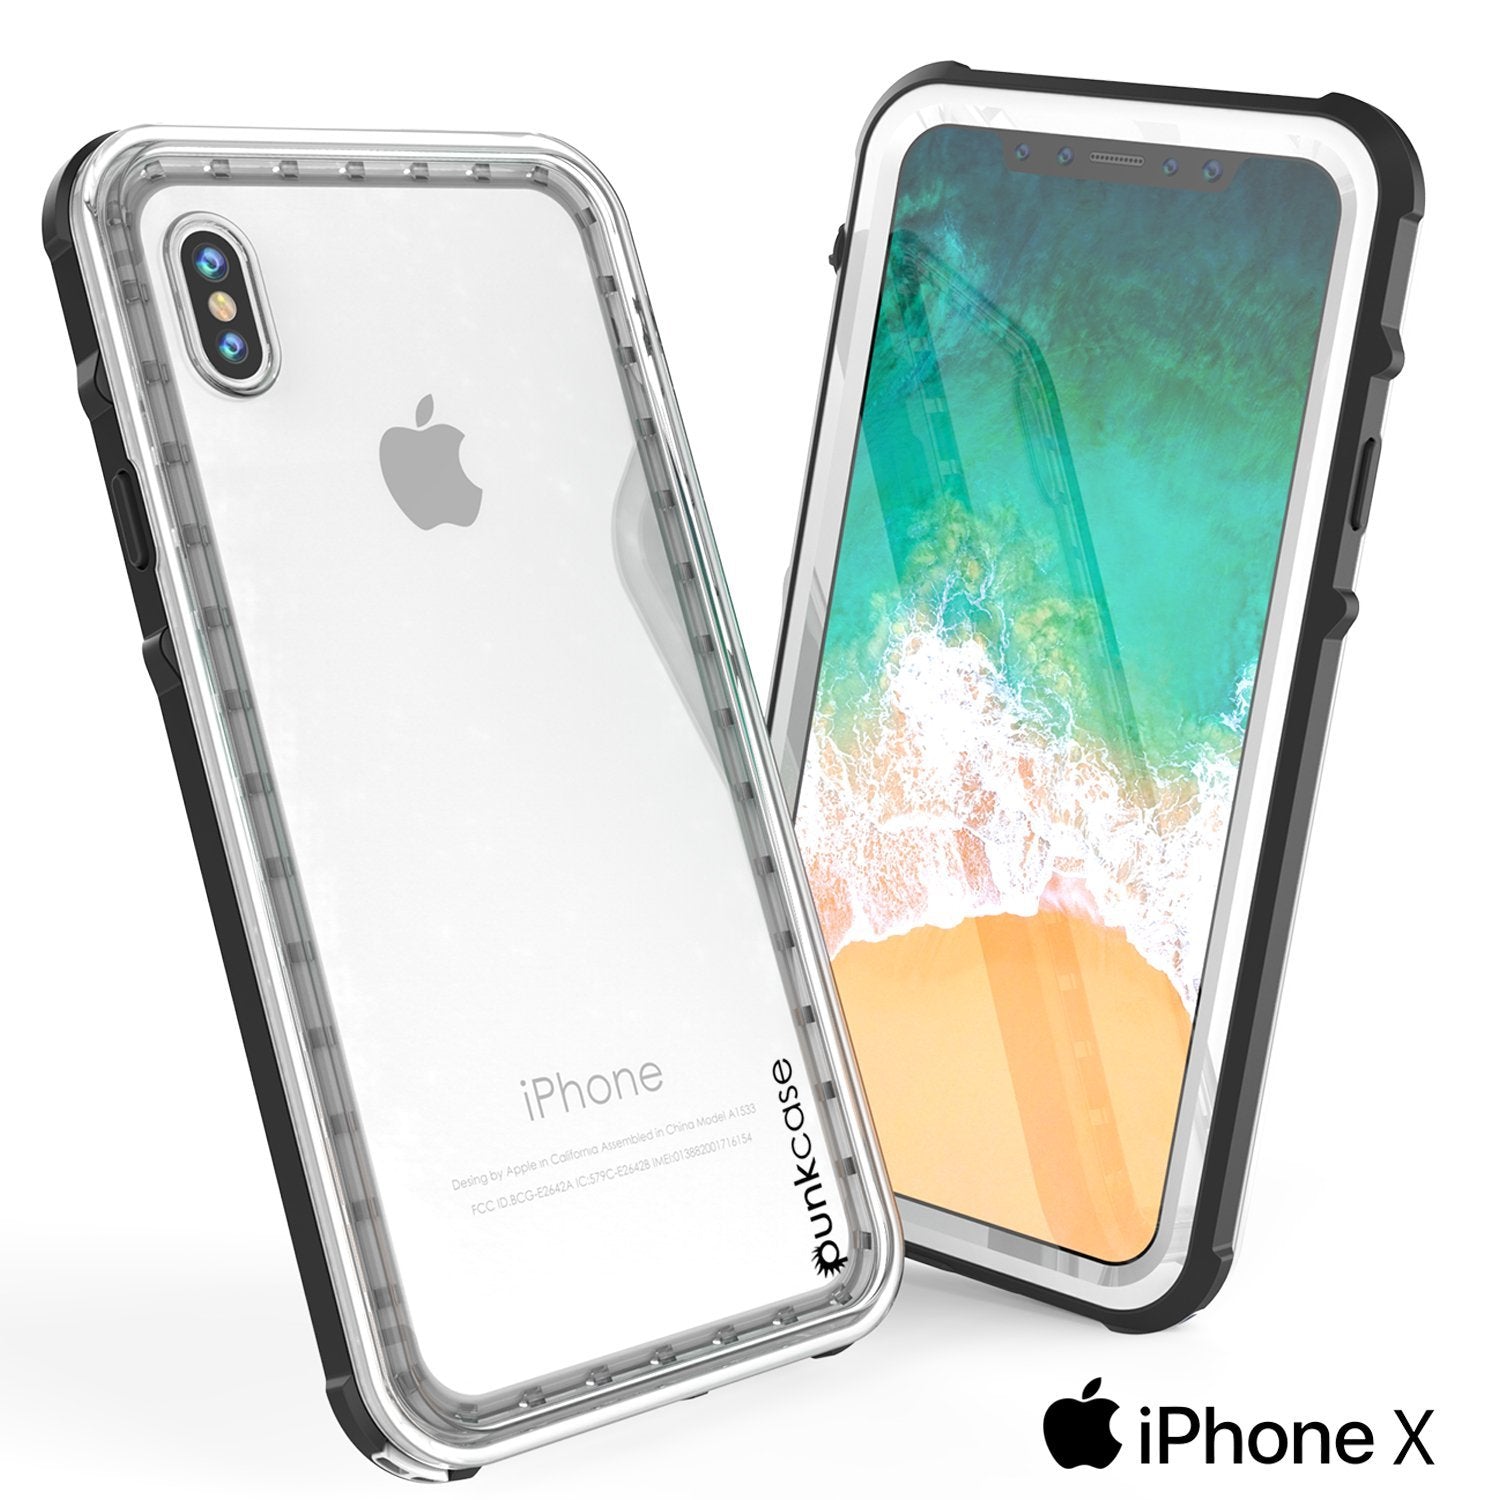 iPhone XS Case, PUNKCase [CRYSTAL SERIES] Protective IP68 Certified, Ultra Slim Fit [White]